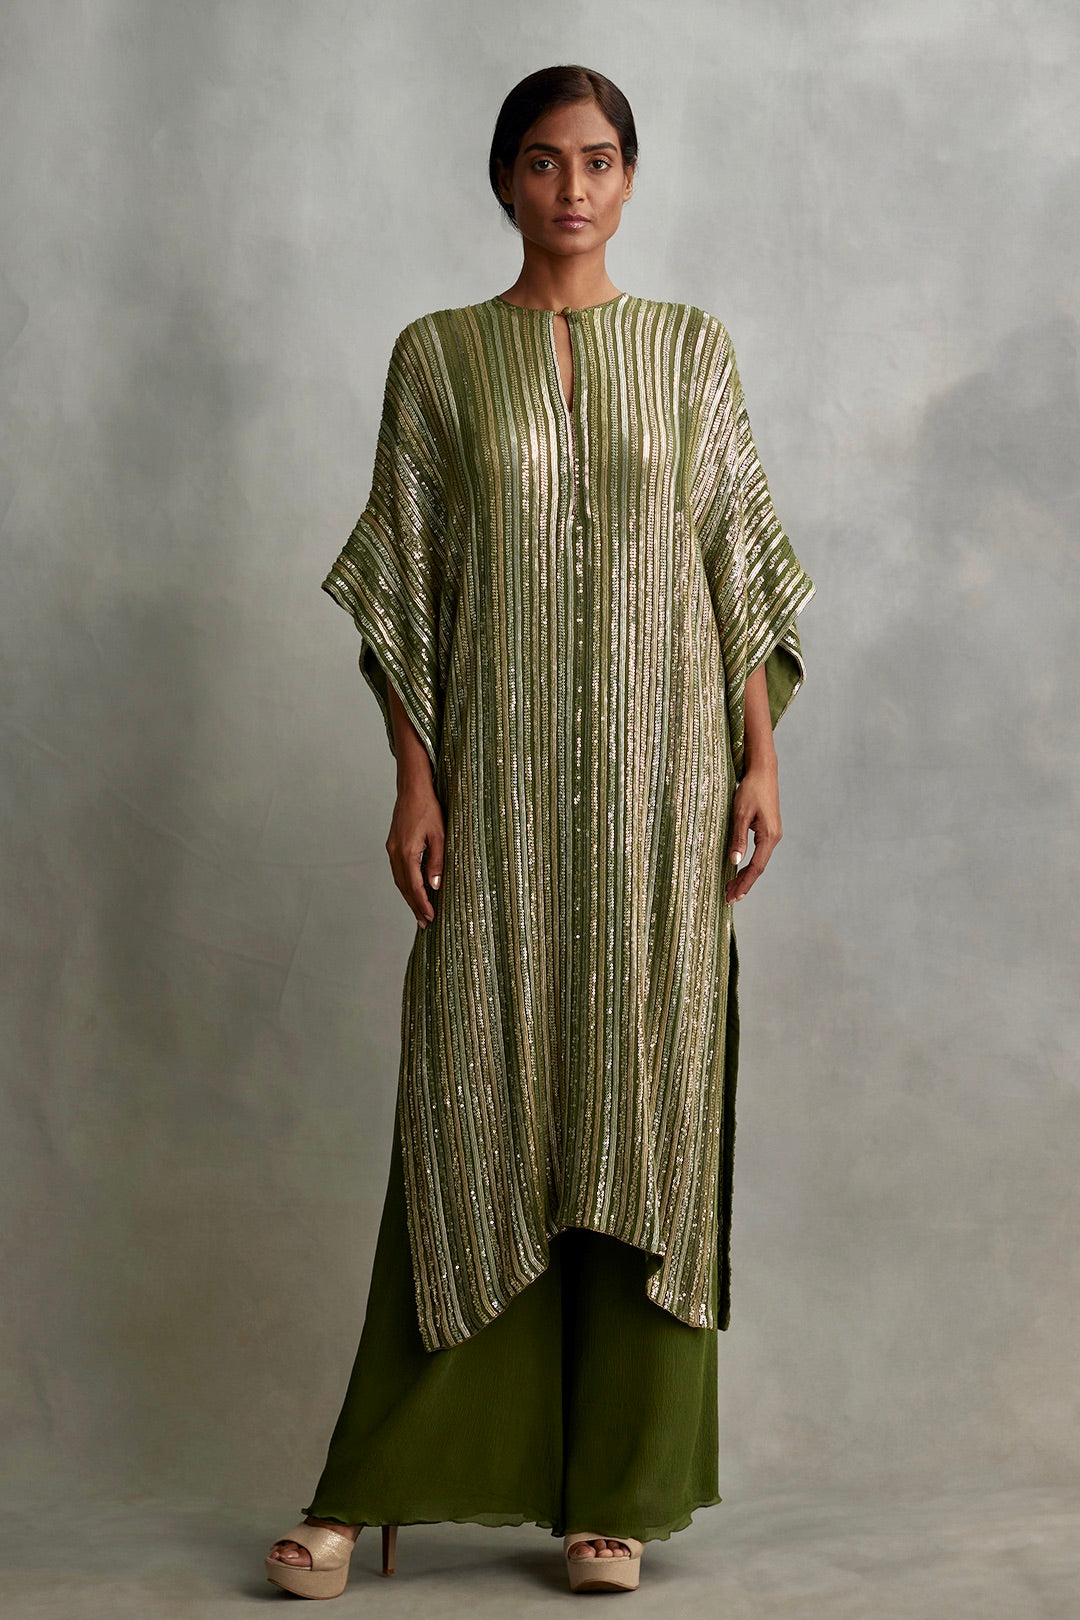 Kaftan Set in Small Sequin Embroidery